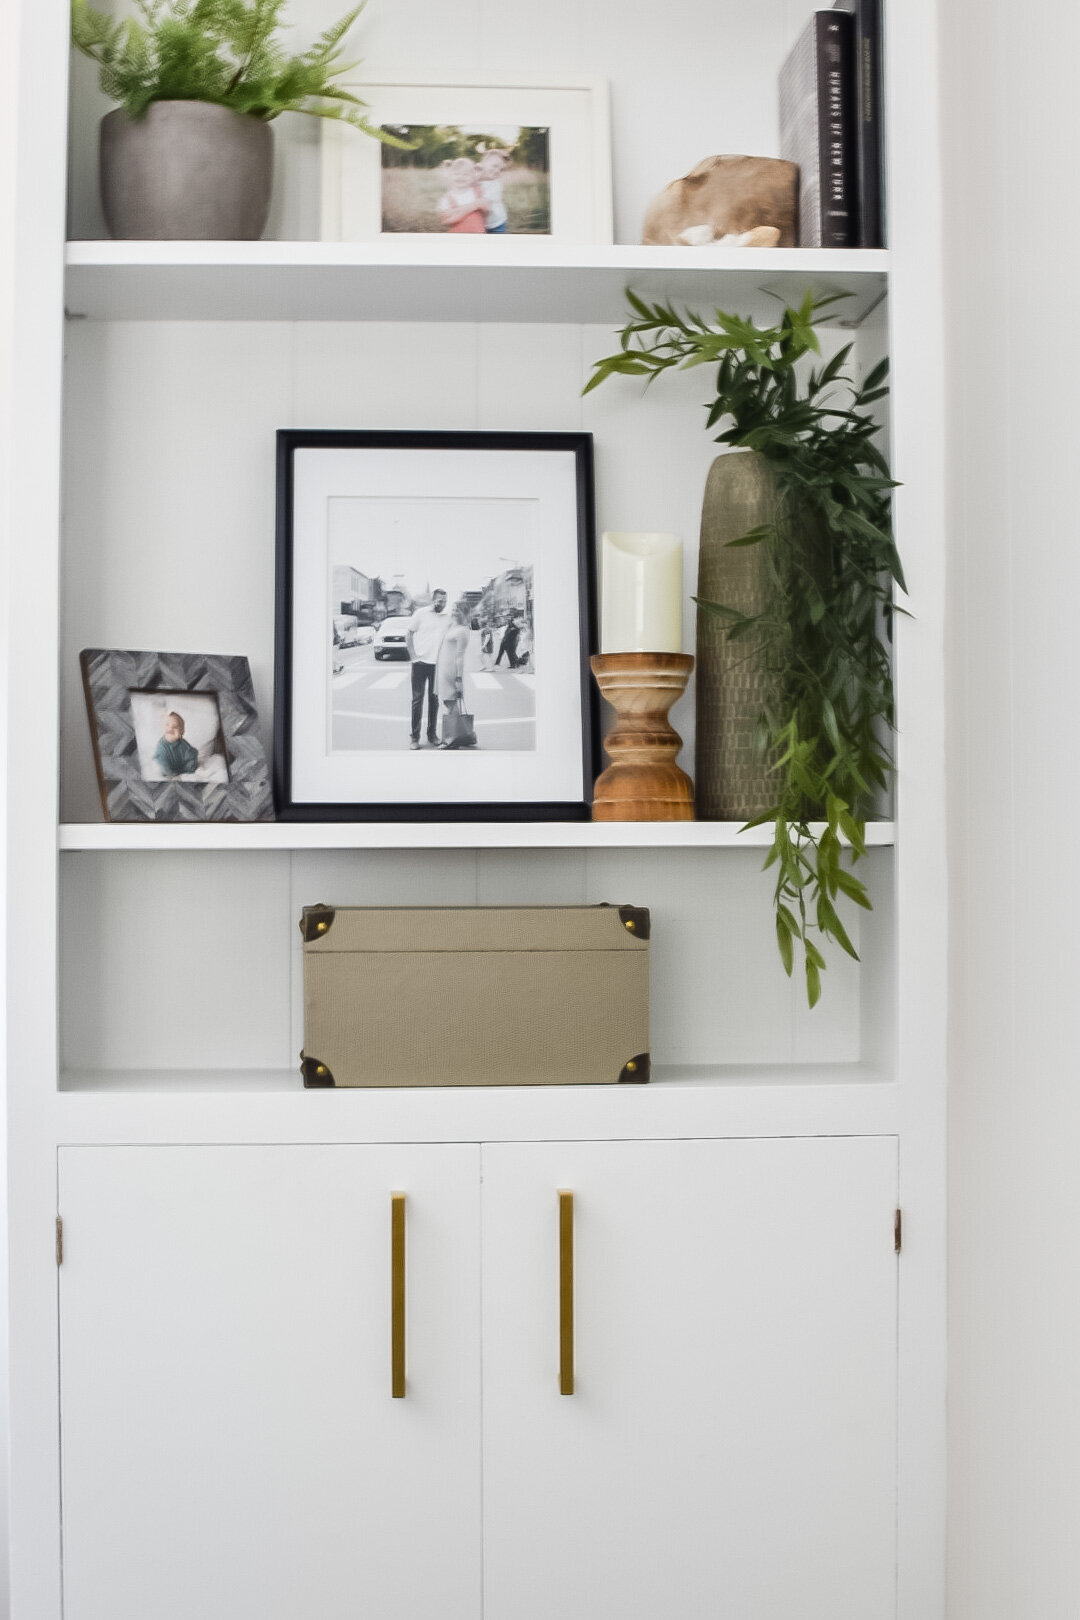 A white living room shelf with photos and plants